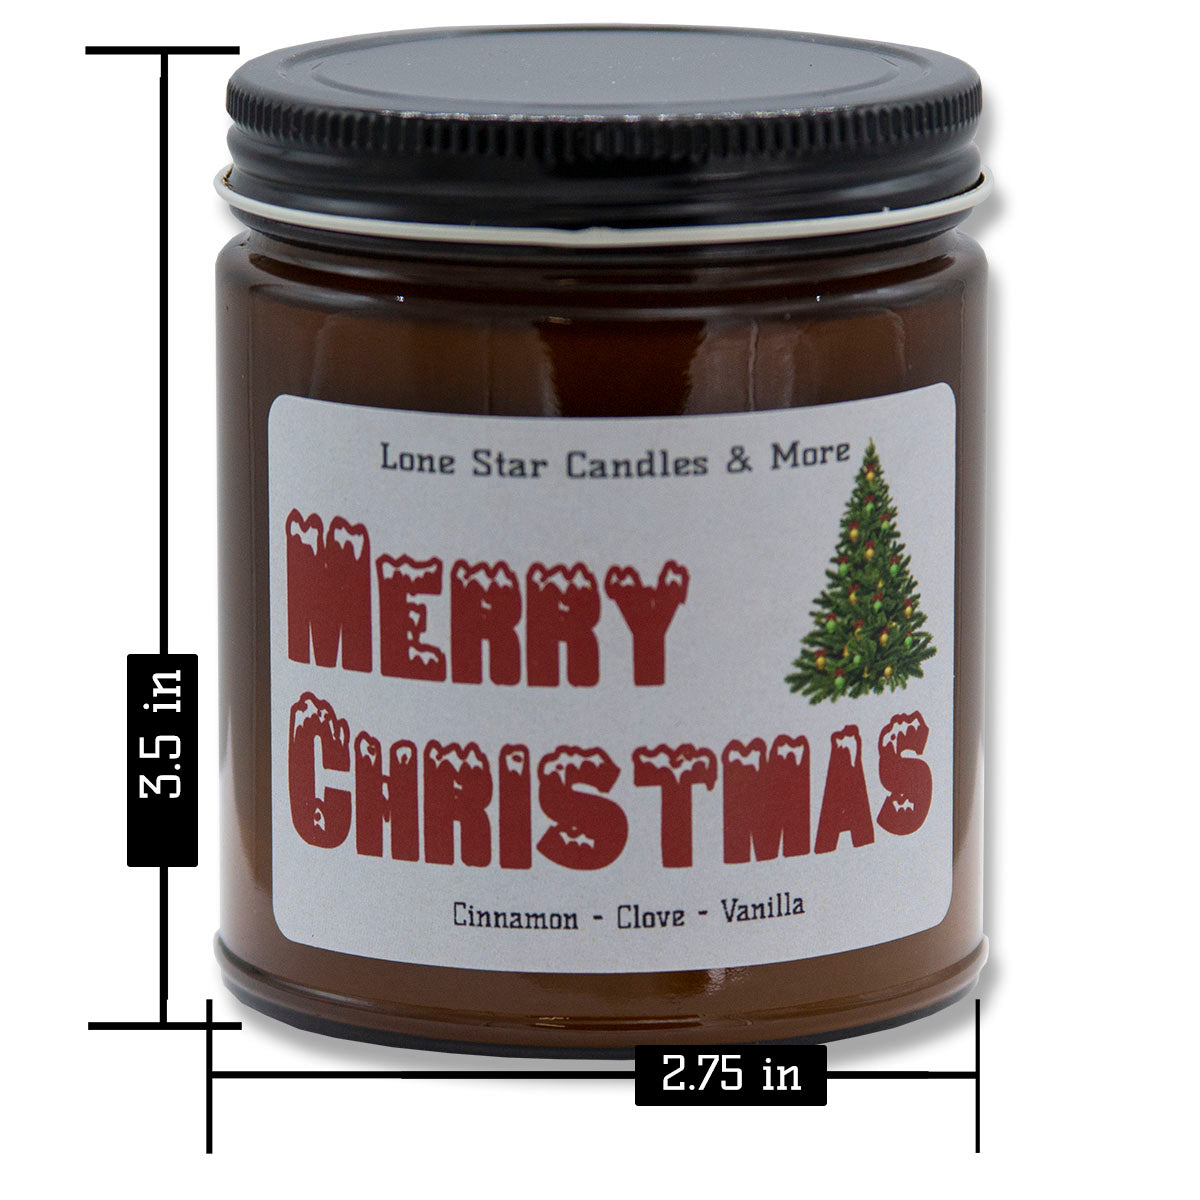 Cinnamon Vanilla, Lone Star Candles & More's Premium Hand Poured Strong Scented Soy Wax Gift Candle, Ground Cinnamon & Sweet Vanilla Bean, US Made in Texas, Round Amber Glass Jars, 9oz Merry Christmas